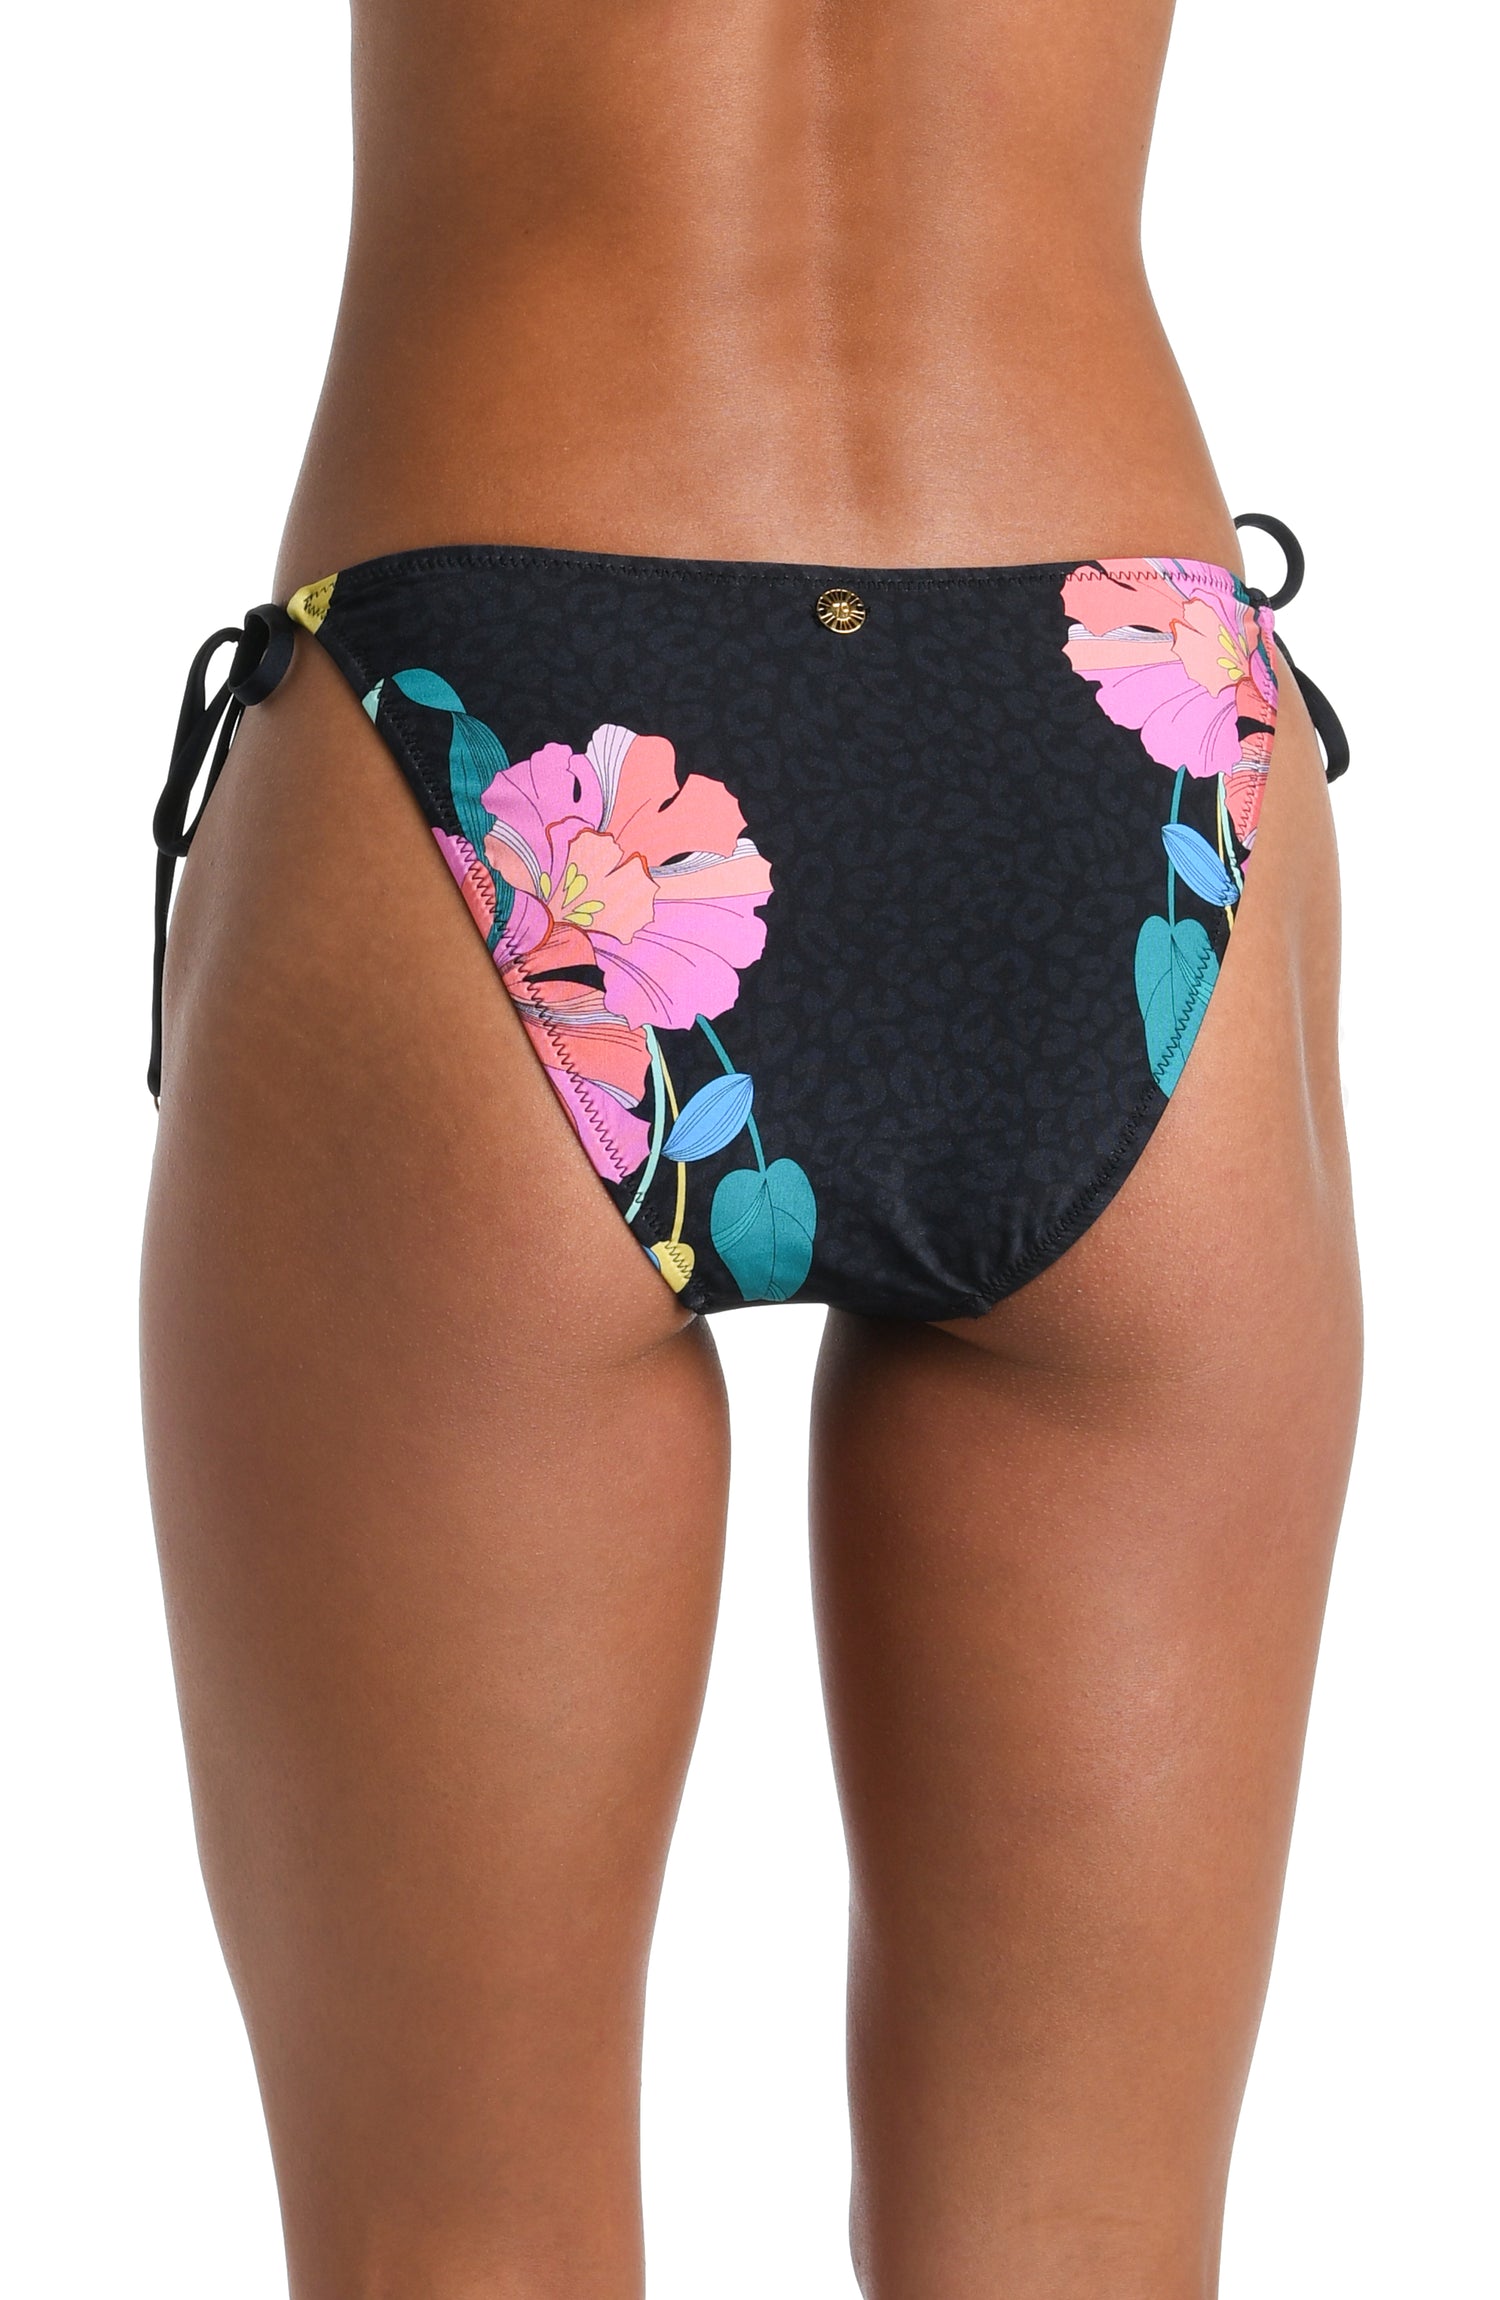 Model is wearing a black, pink, and green multicolored floral patterned Side Tie Hipster Bottom